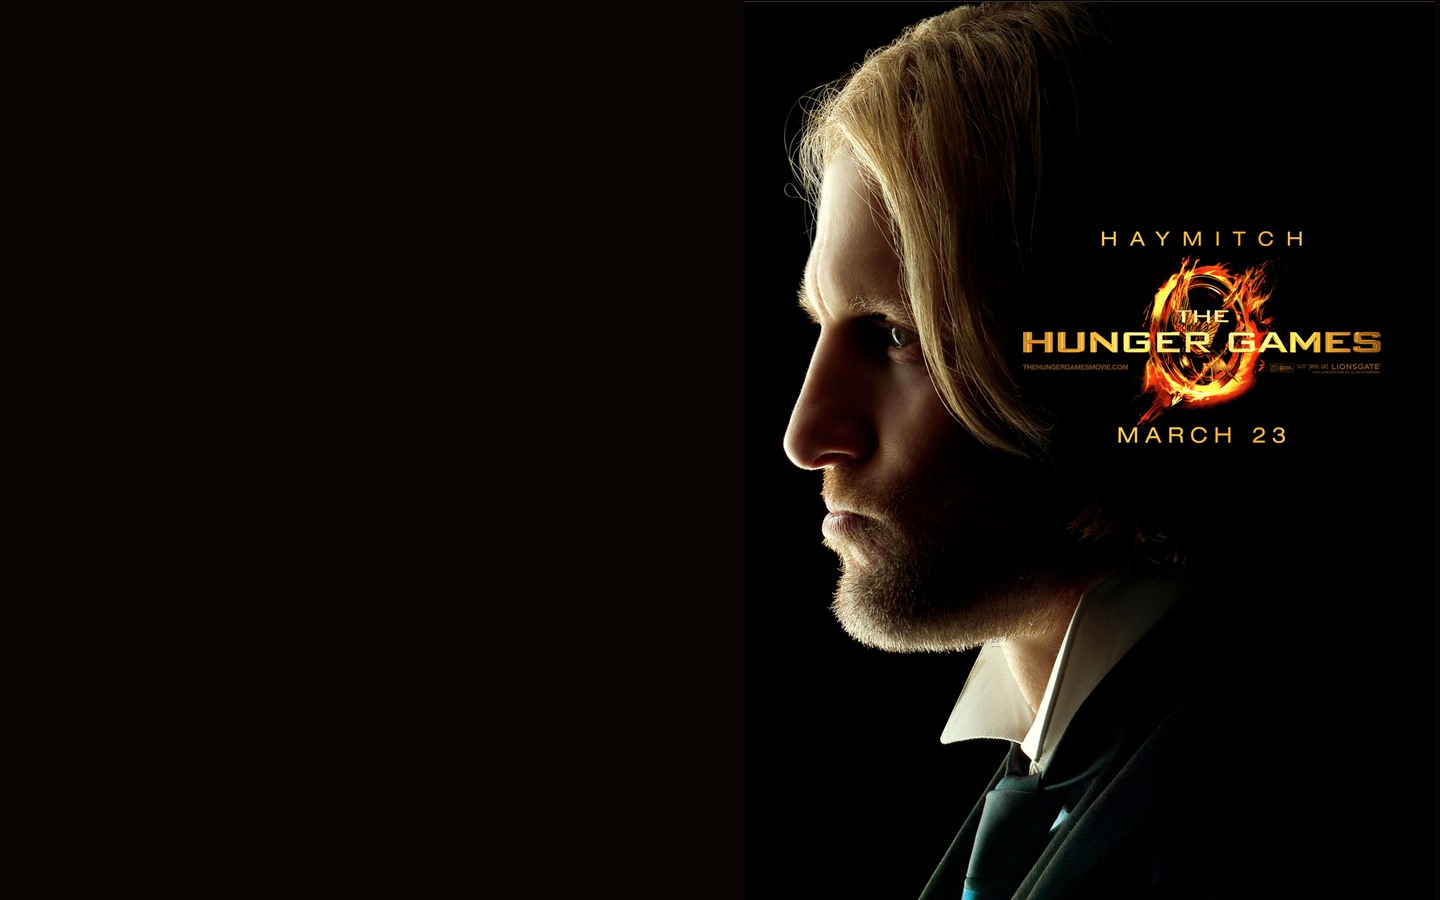 The Hunger Games HD wallpapers #12 - 1440x900